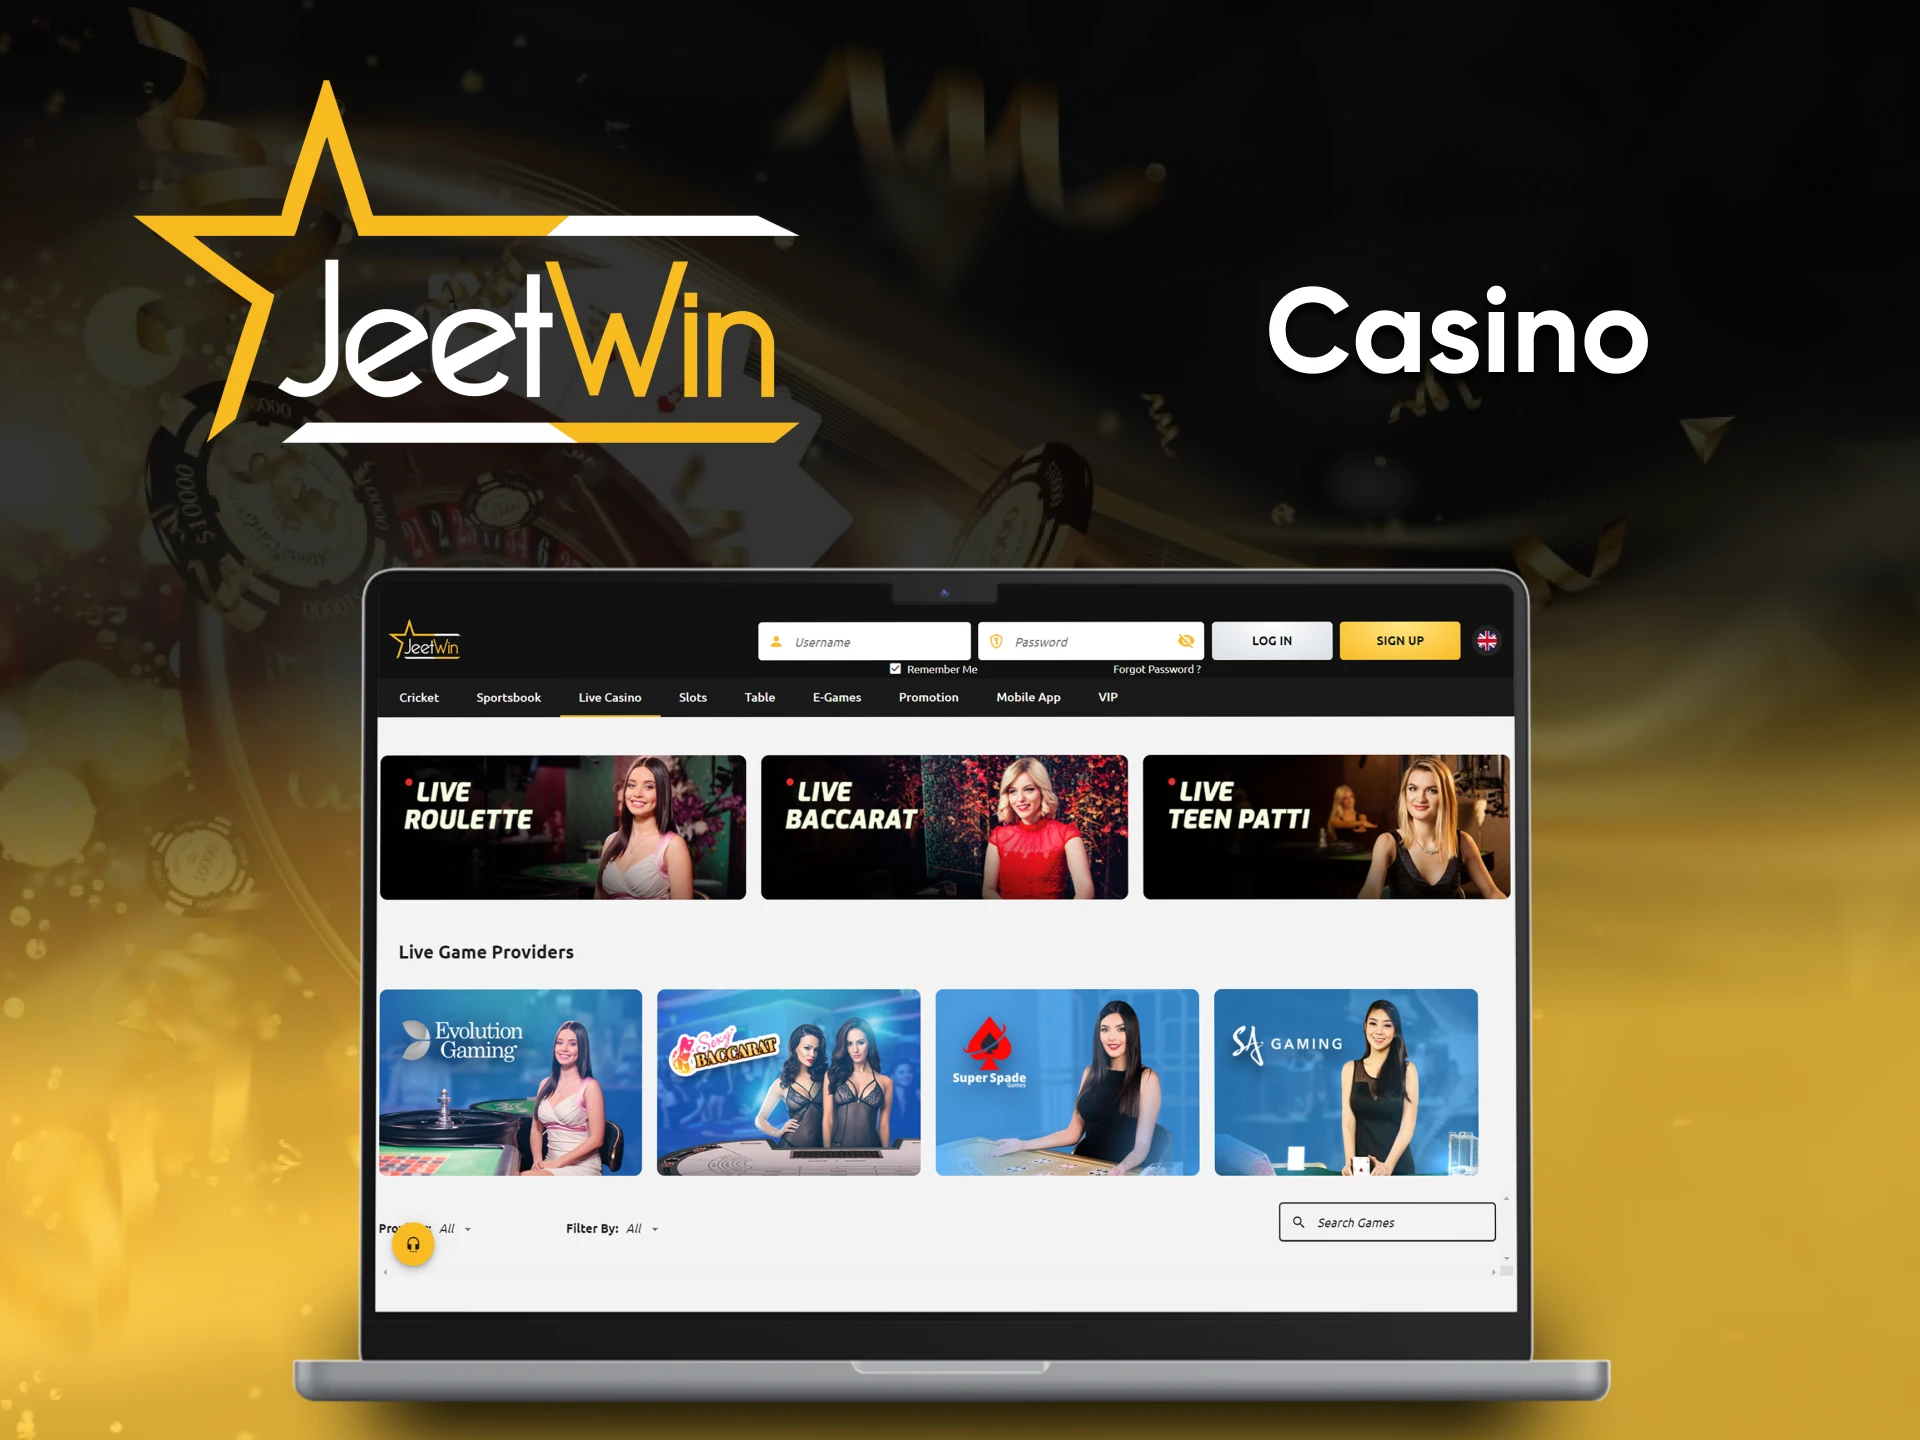 By choosing Jettwin you can play a wide variety of casino games.